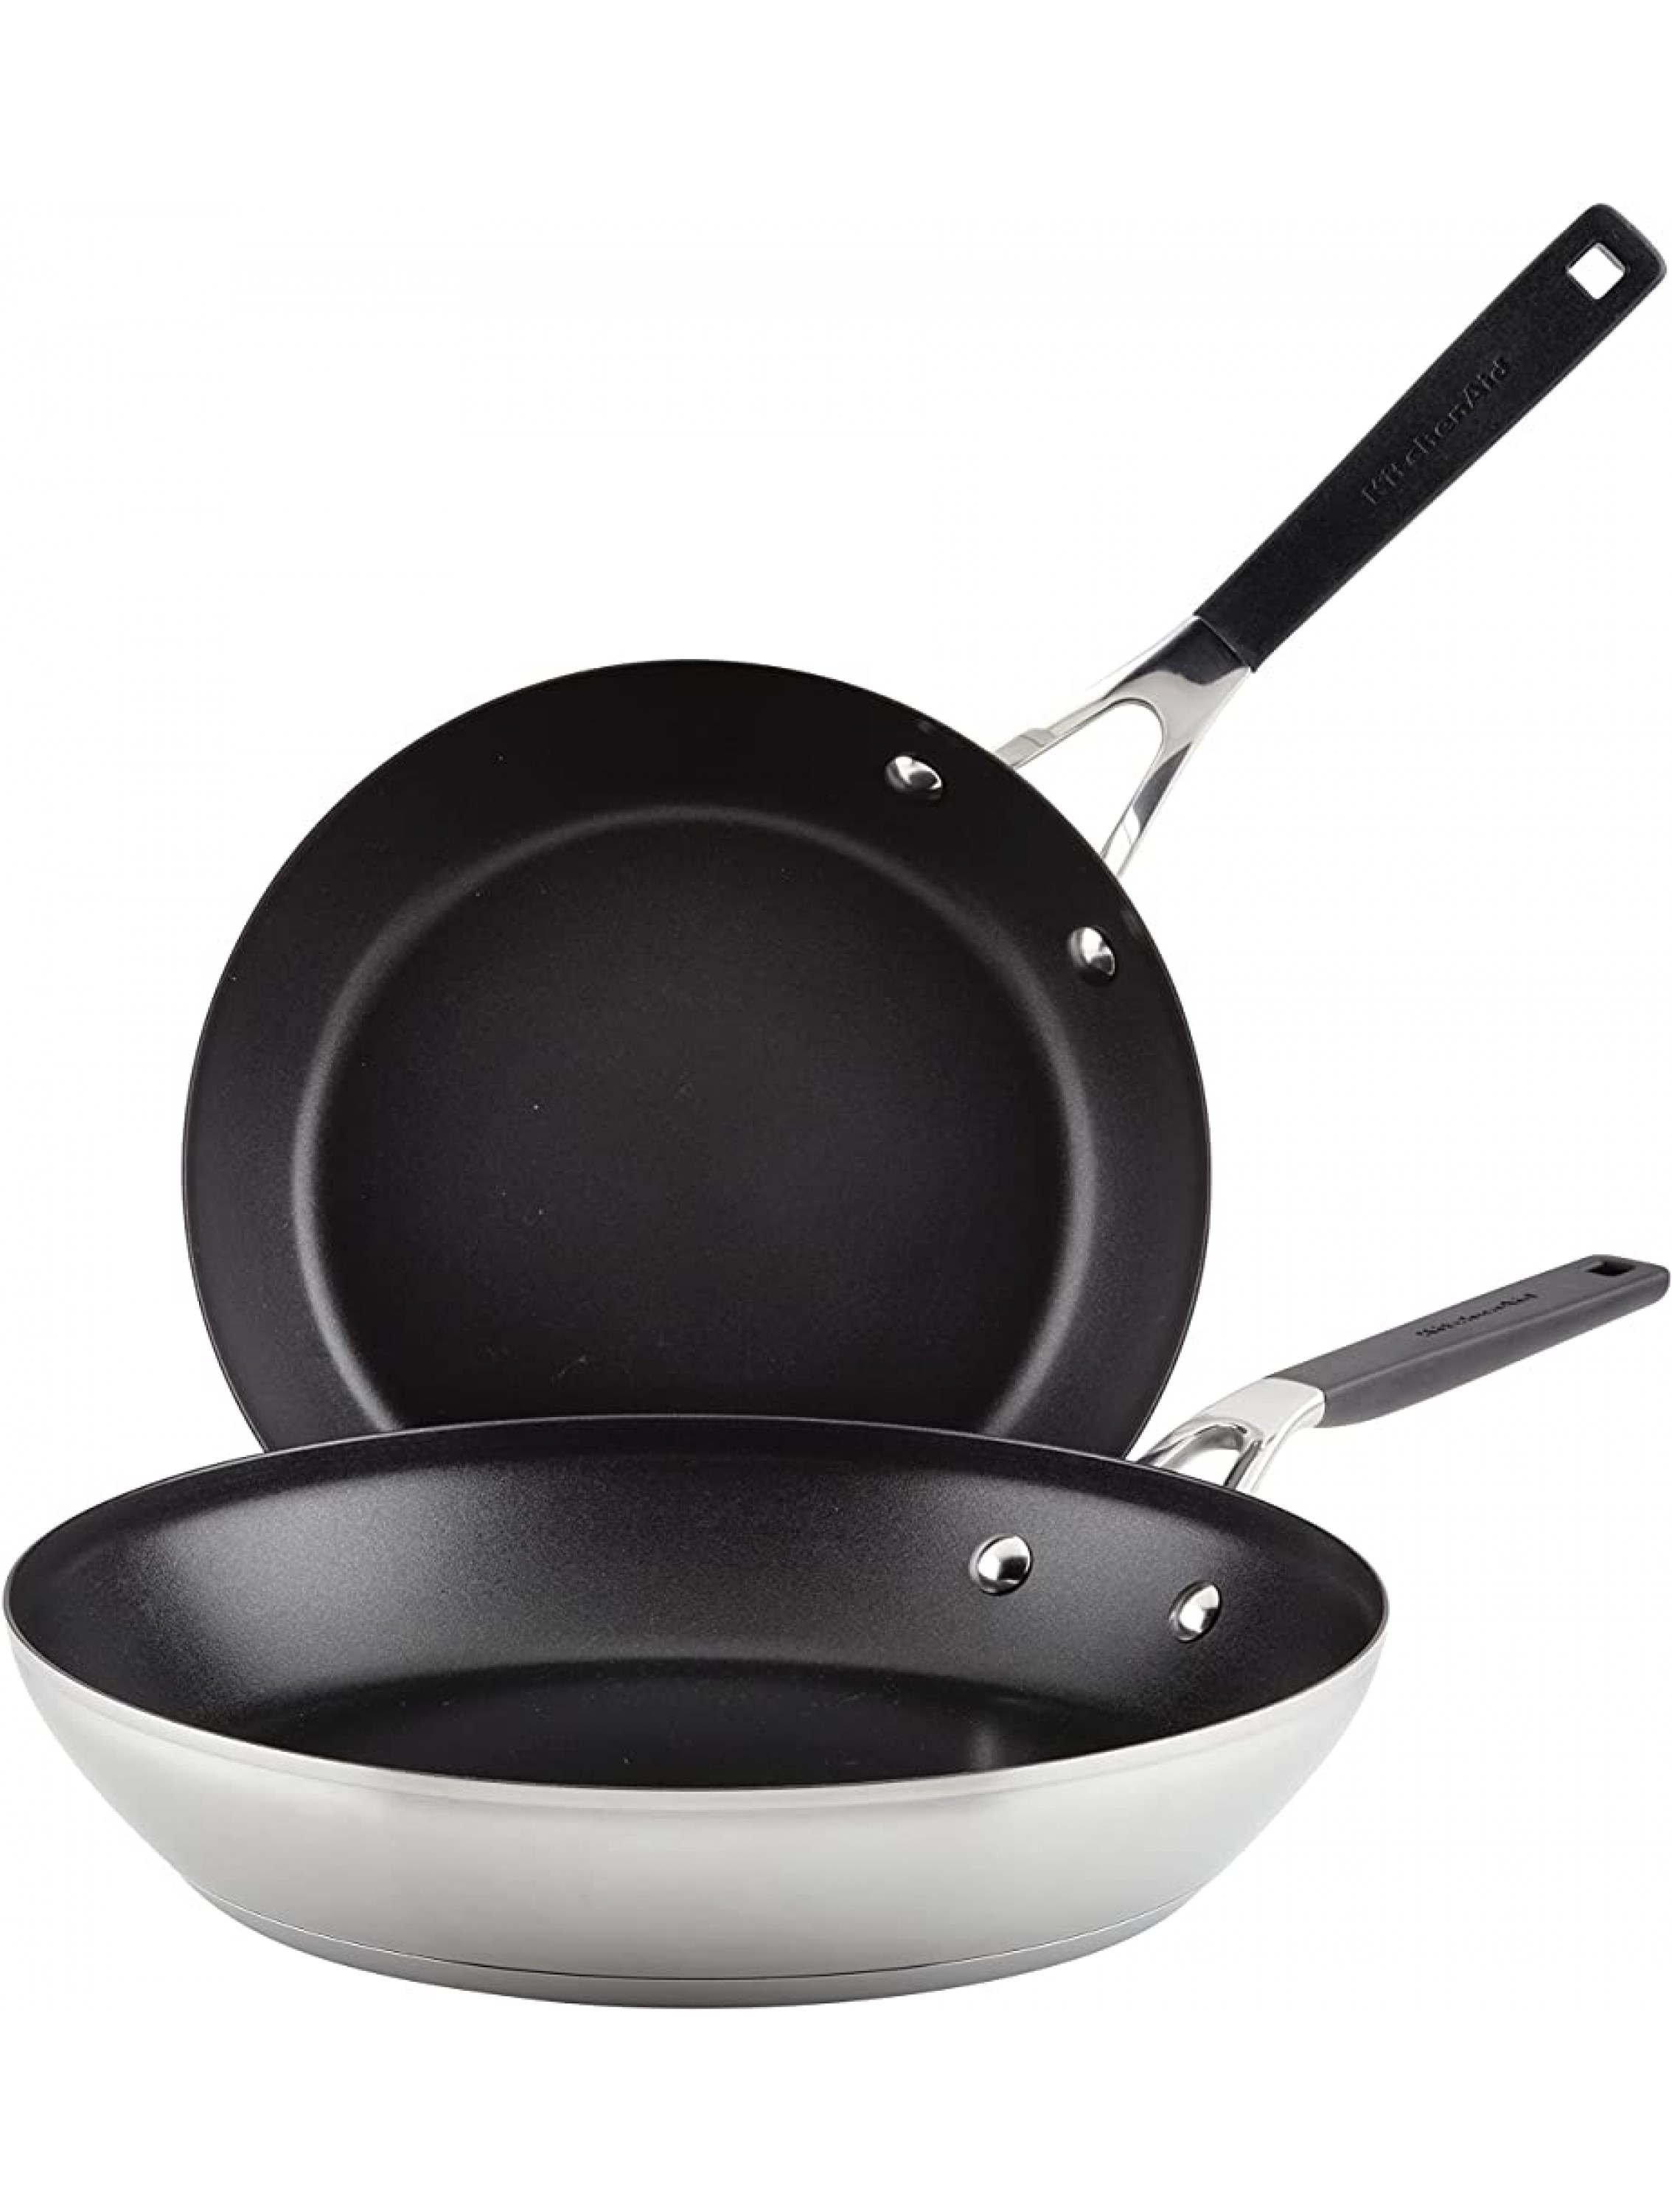 KitchenAid Stainless Steel Nonstick Frying Pans Skillet Set 9.5 Inch and 12 Inch Brushed Stainless Steel - BBFNY278D